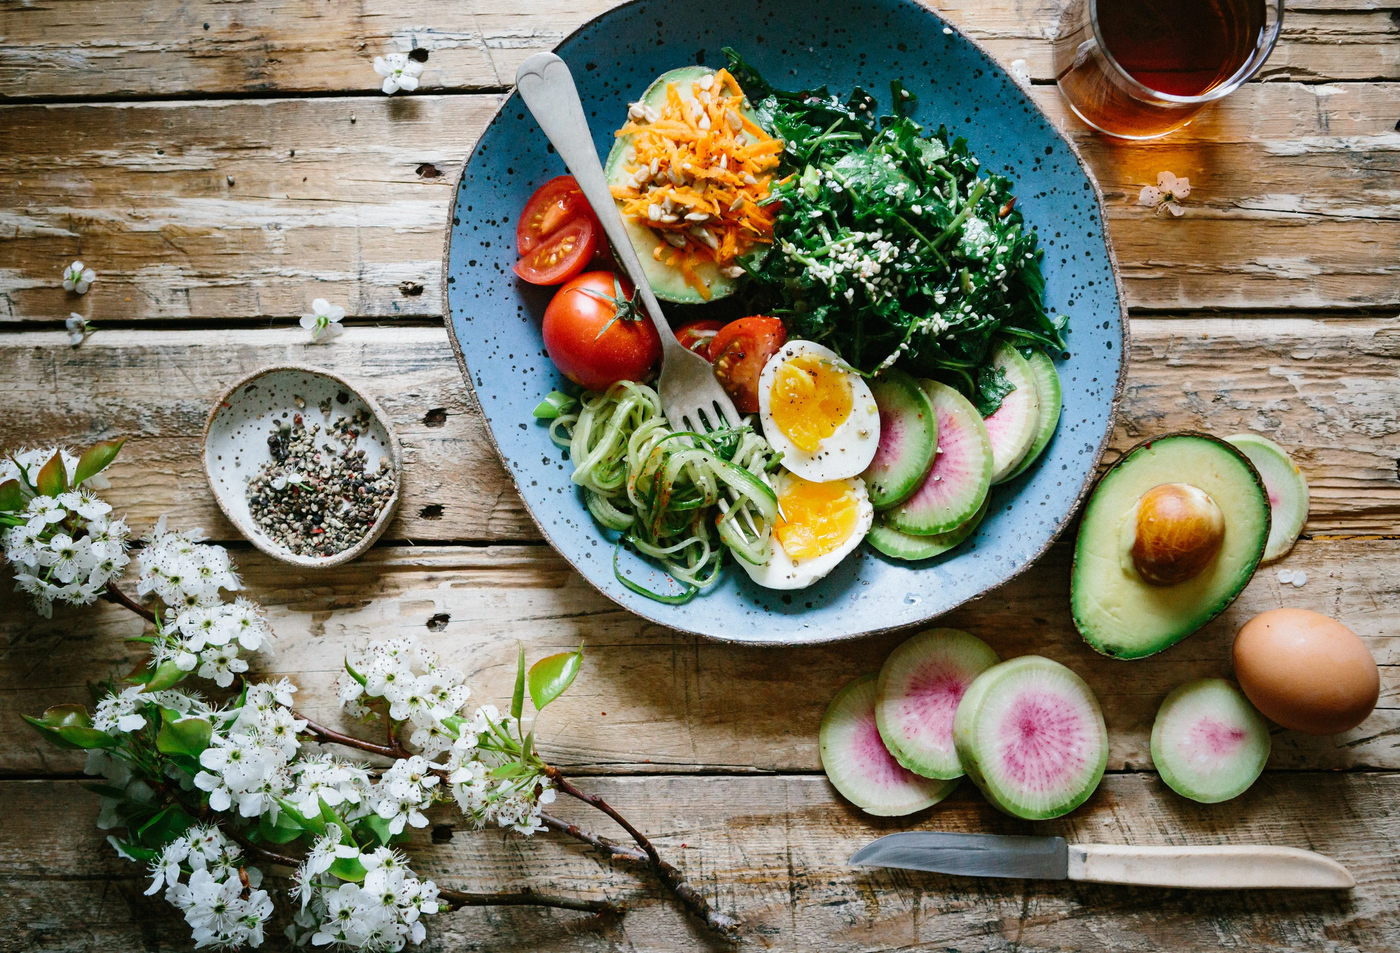 FIGHTING INFLAMMATION WITH FOOD: A DIETITIAN’S PERSPECTIVE